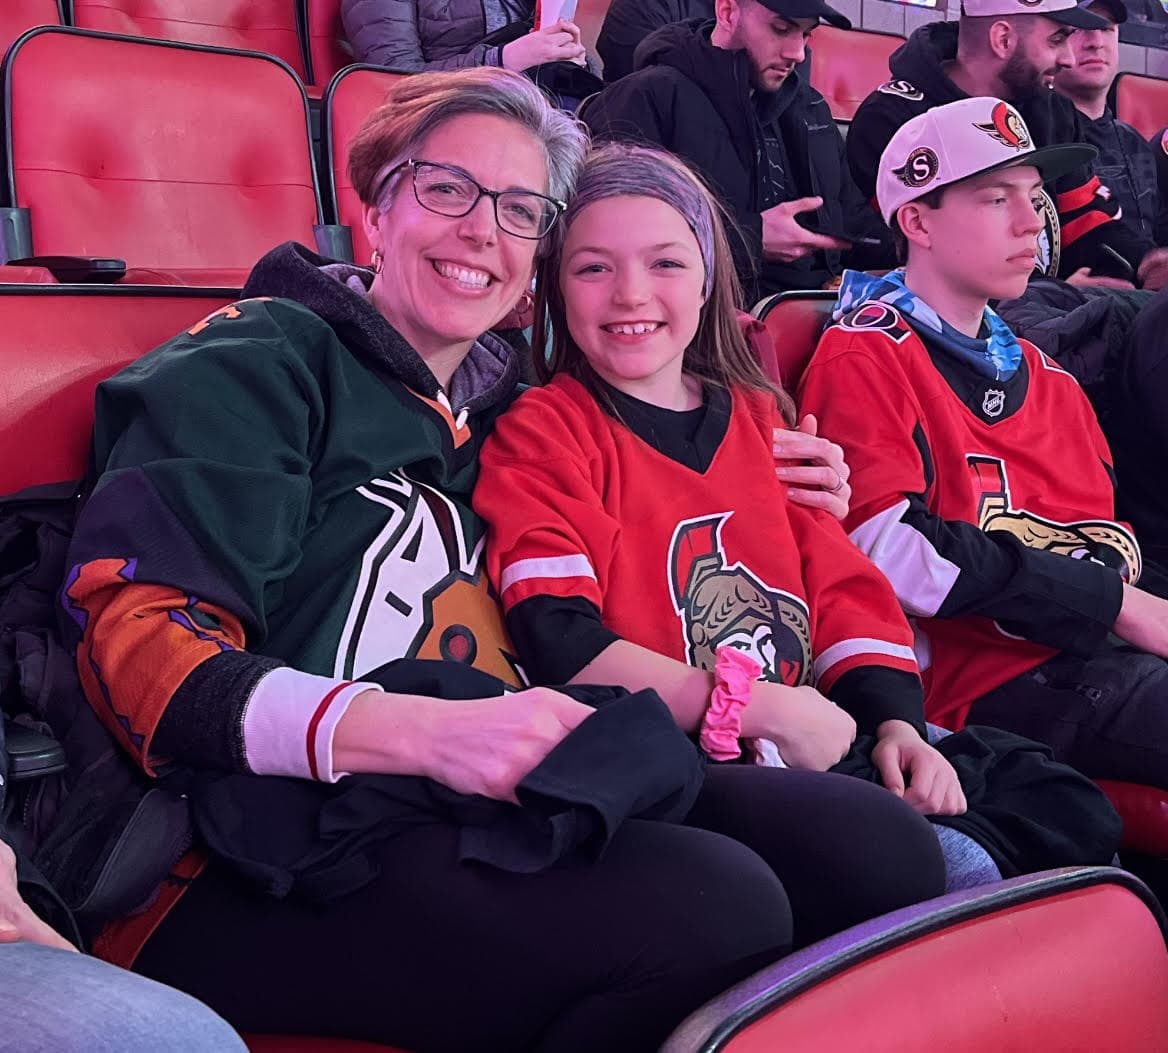 A mother and daughter have a great time while watching their Senators play.